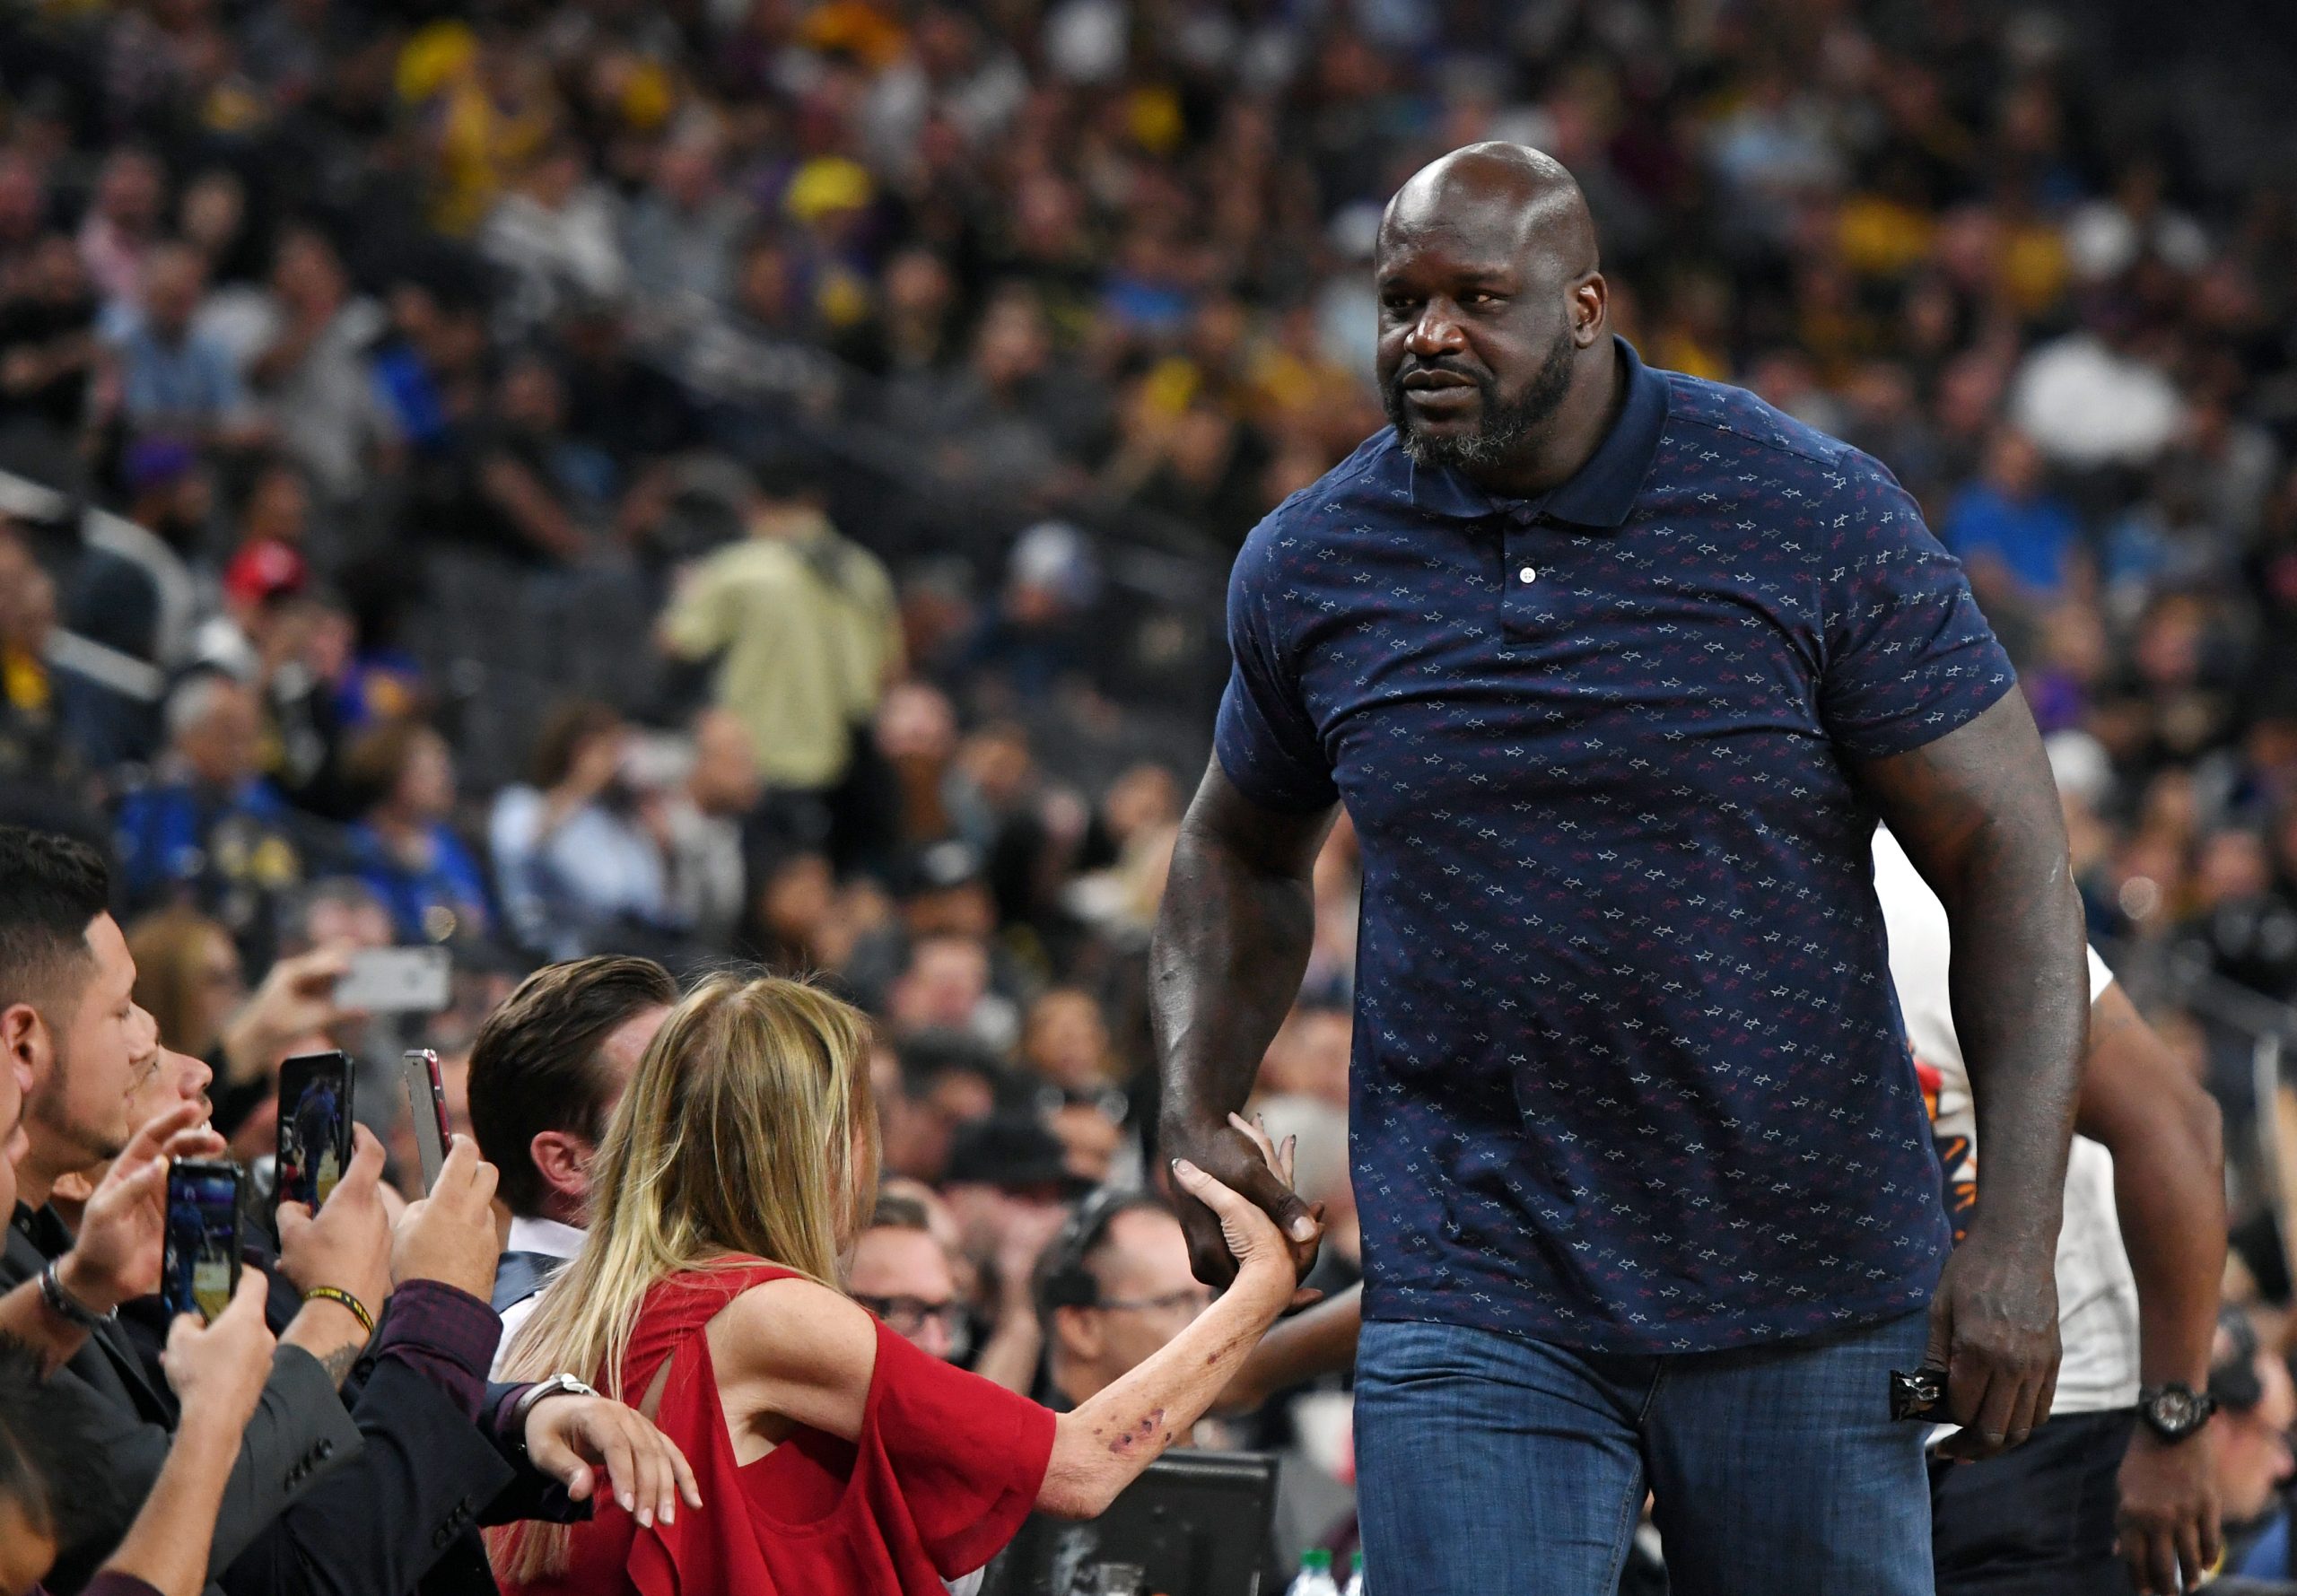 NBA analyst Shaquille O'Neal arrives at a preseason game between the Golden State Warriors and the Los Angeles Lakers.